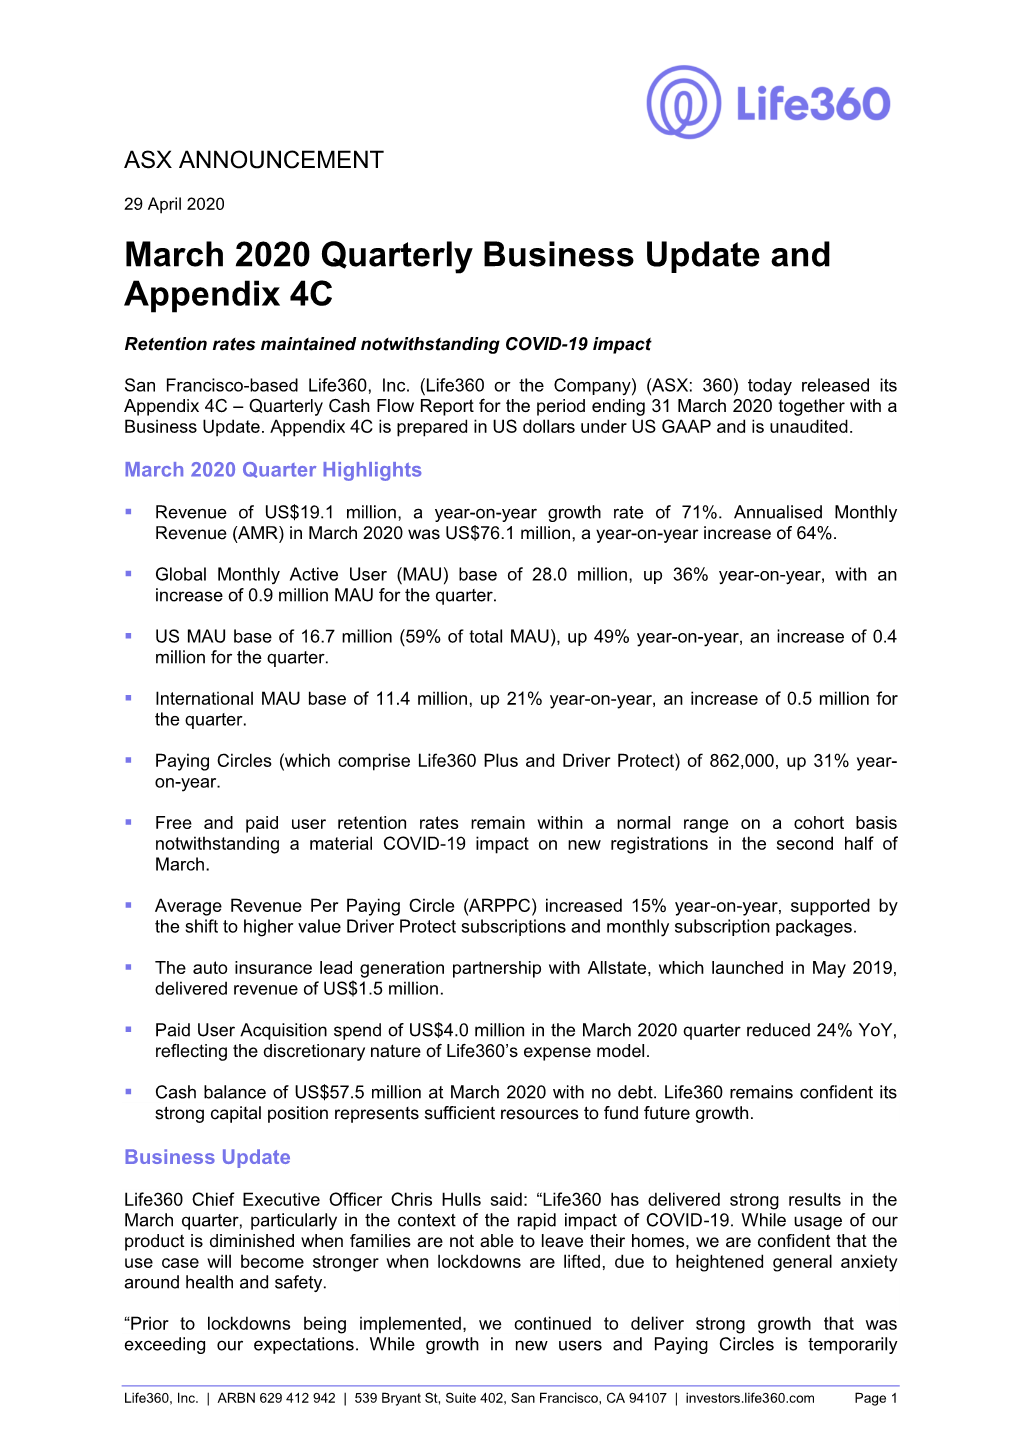 March 2020 Quarterly Business Update and Appendix 4C